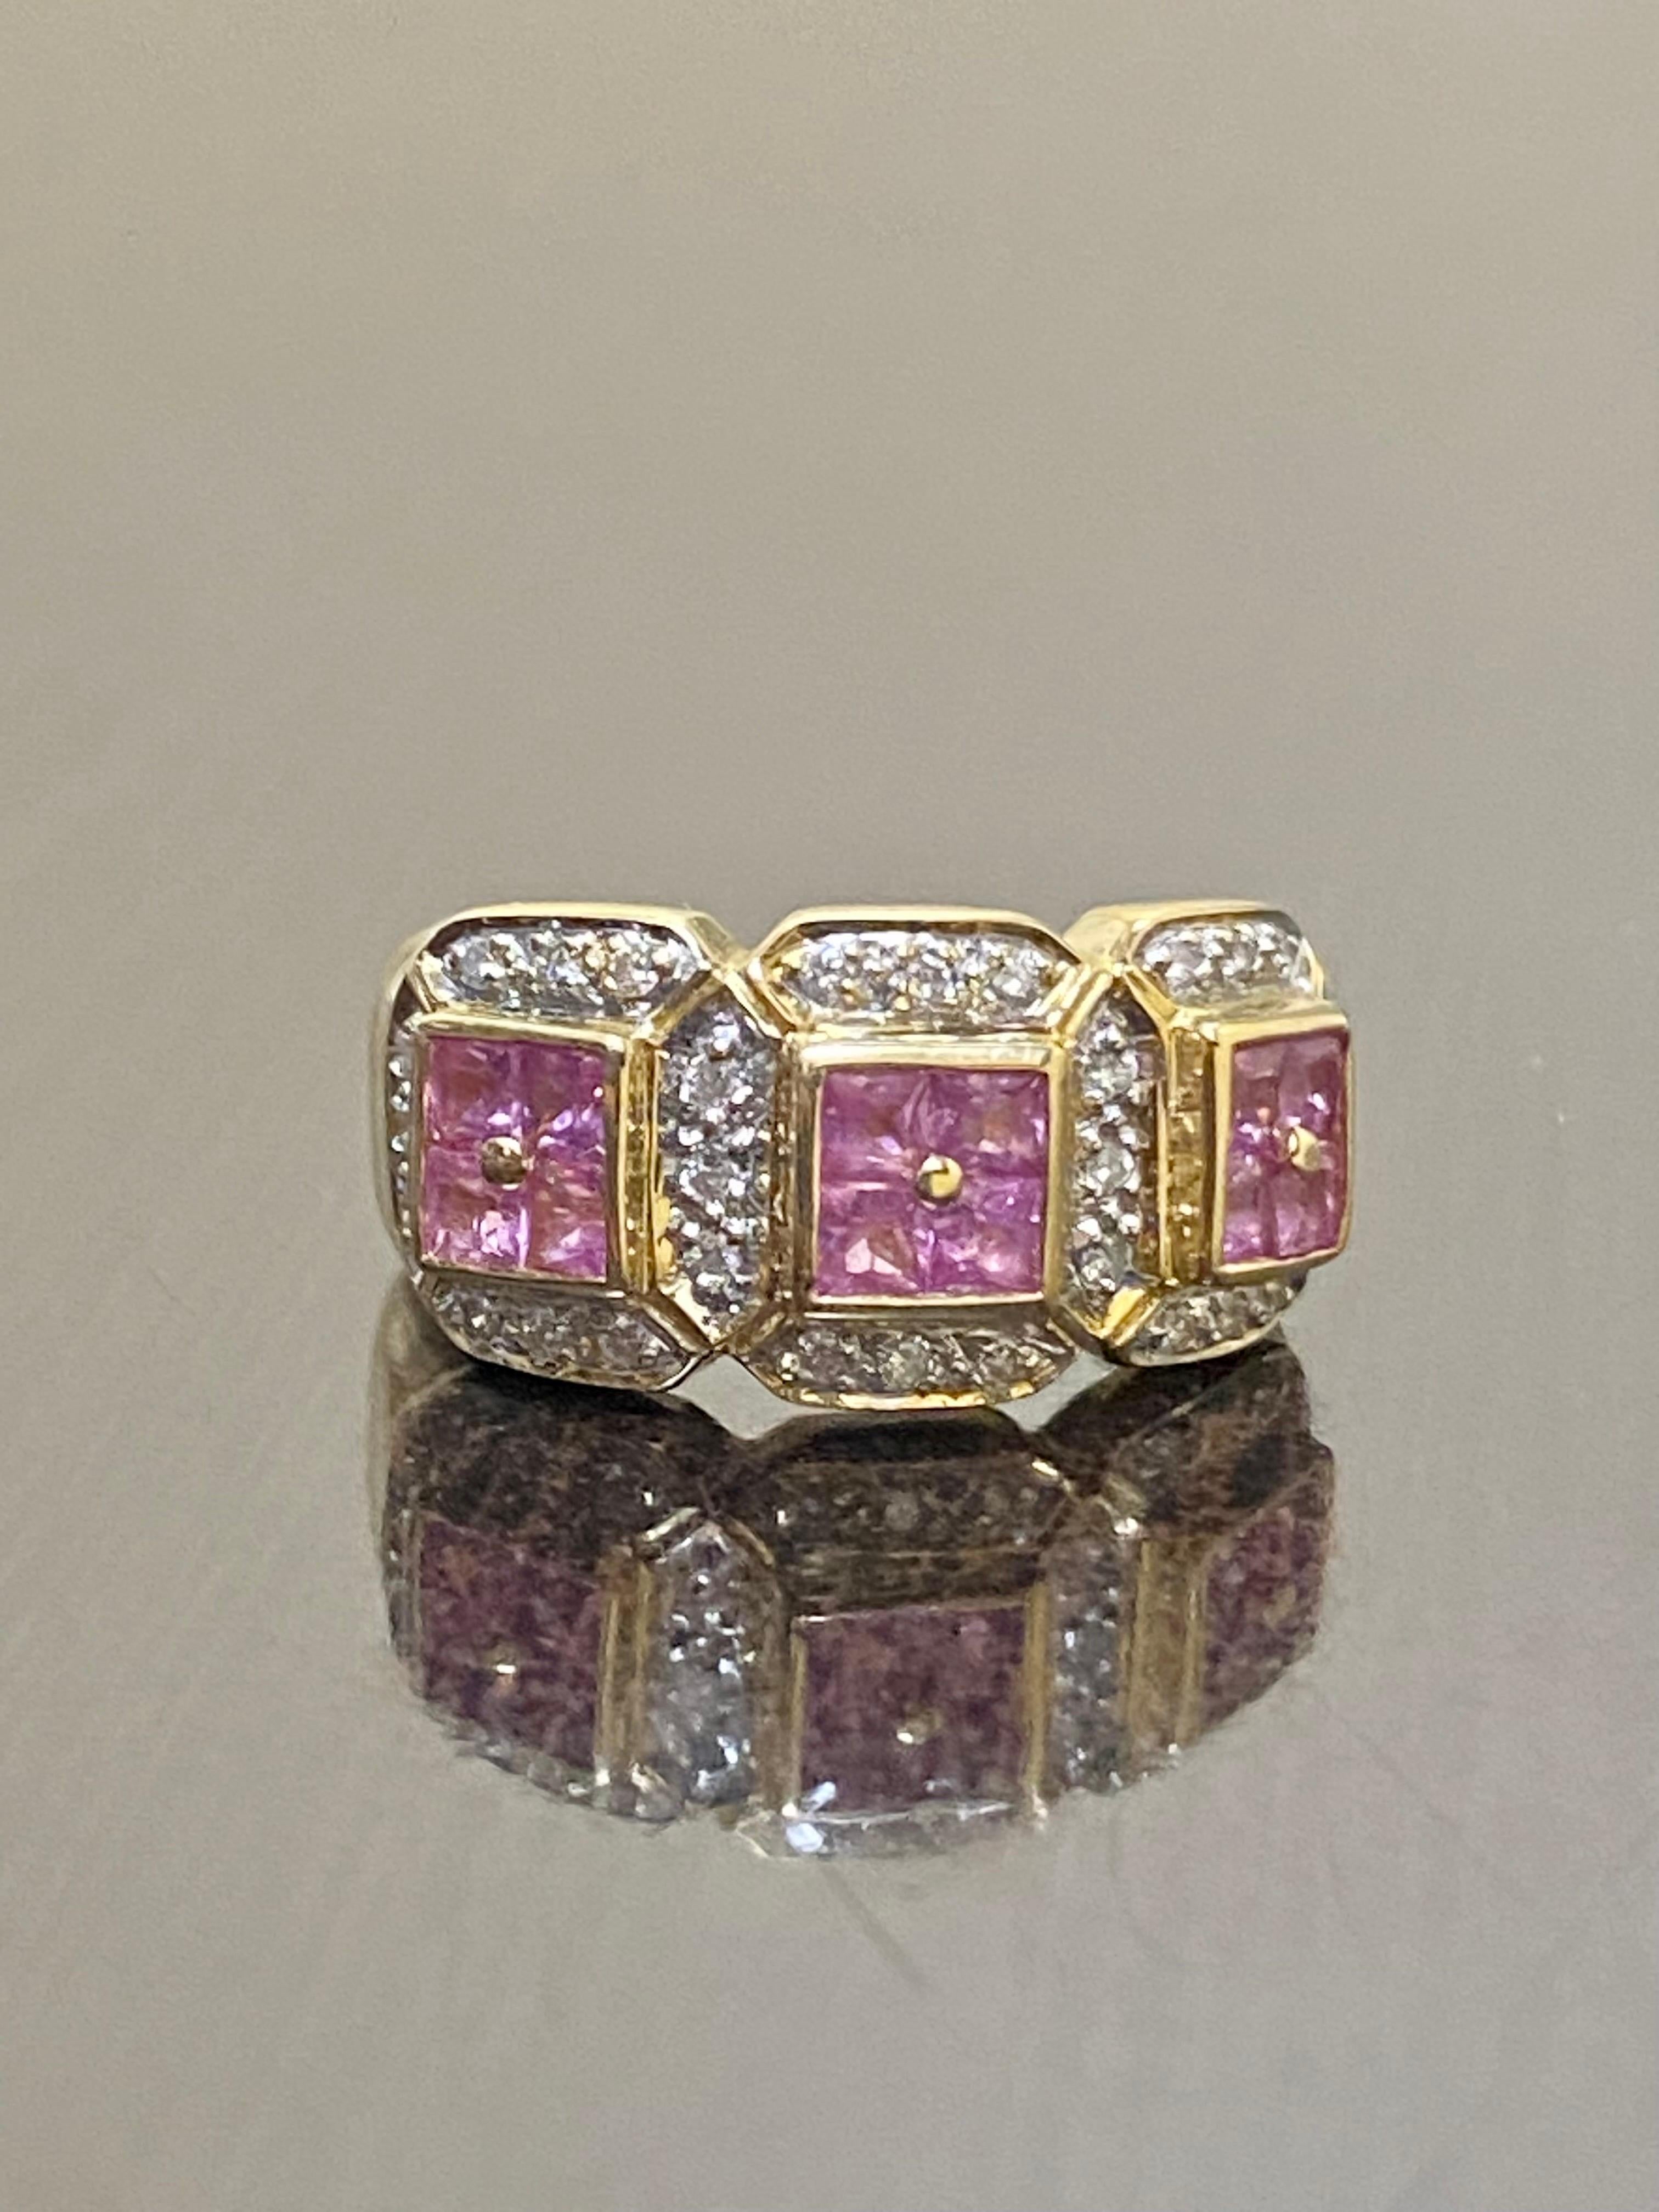 Bellarri 18K Yellow Gold Princess Cut Pink Sapphire Diamond Engagement Band In Excellent Condition For Sale In Los Angeles, CA